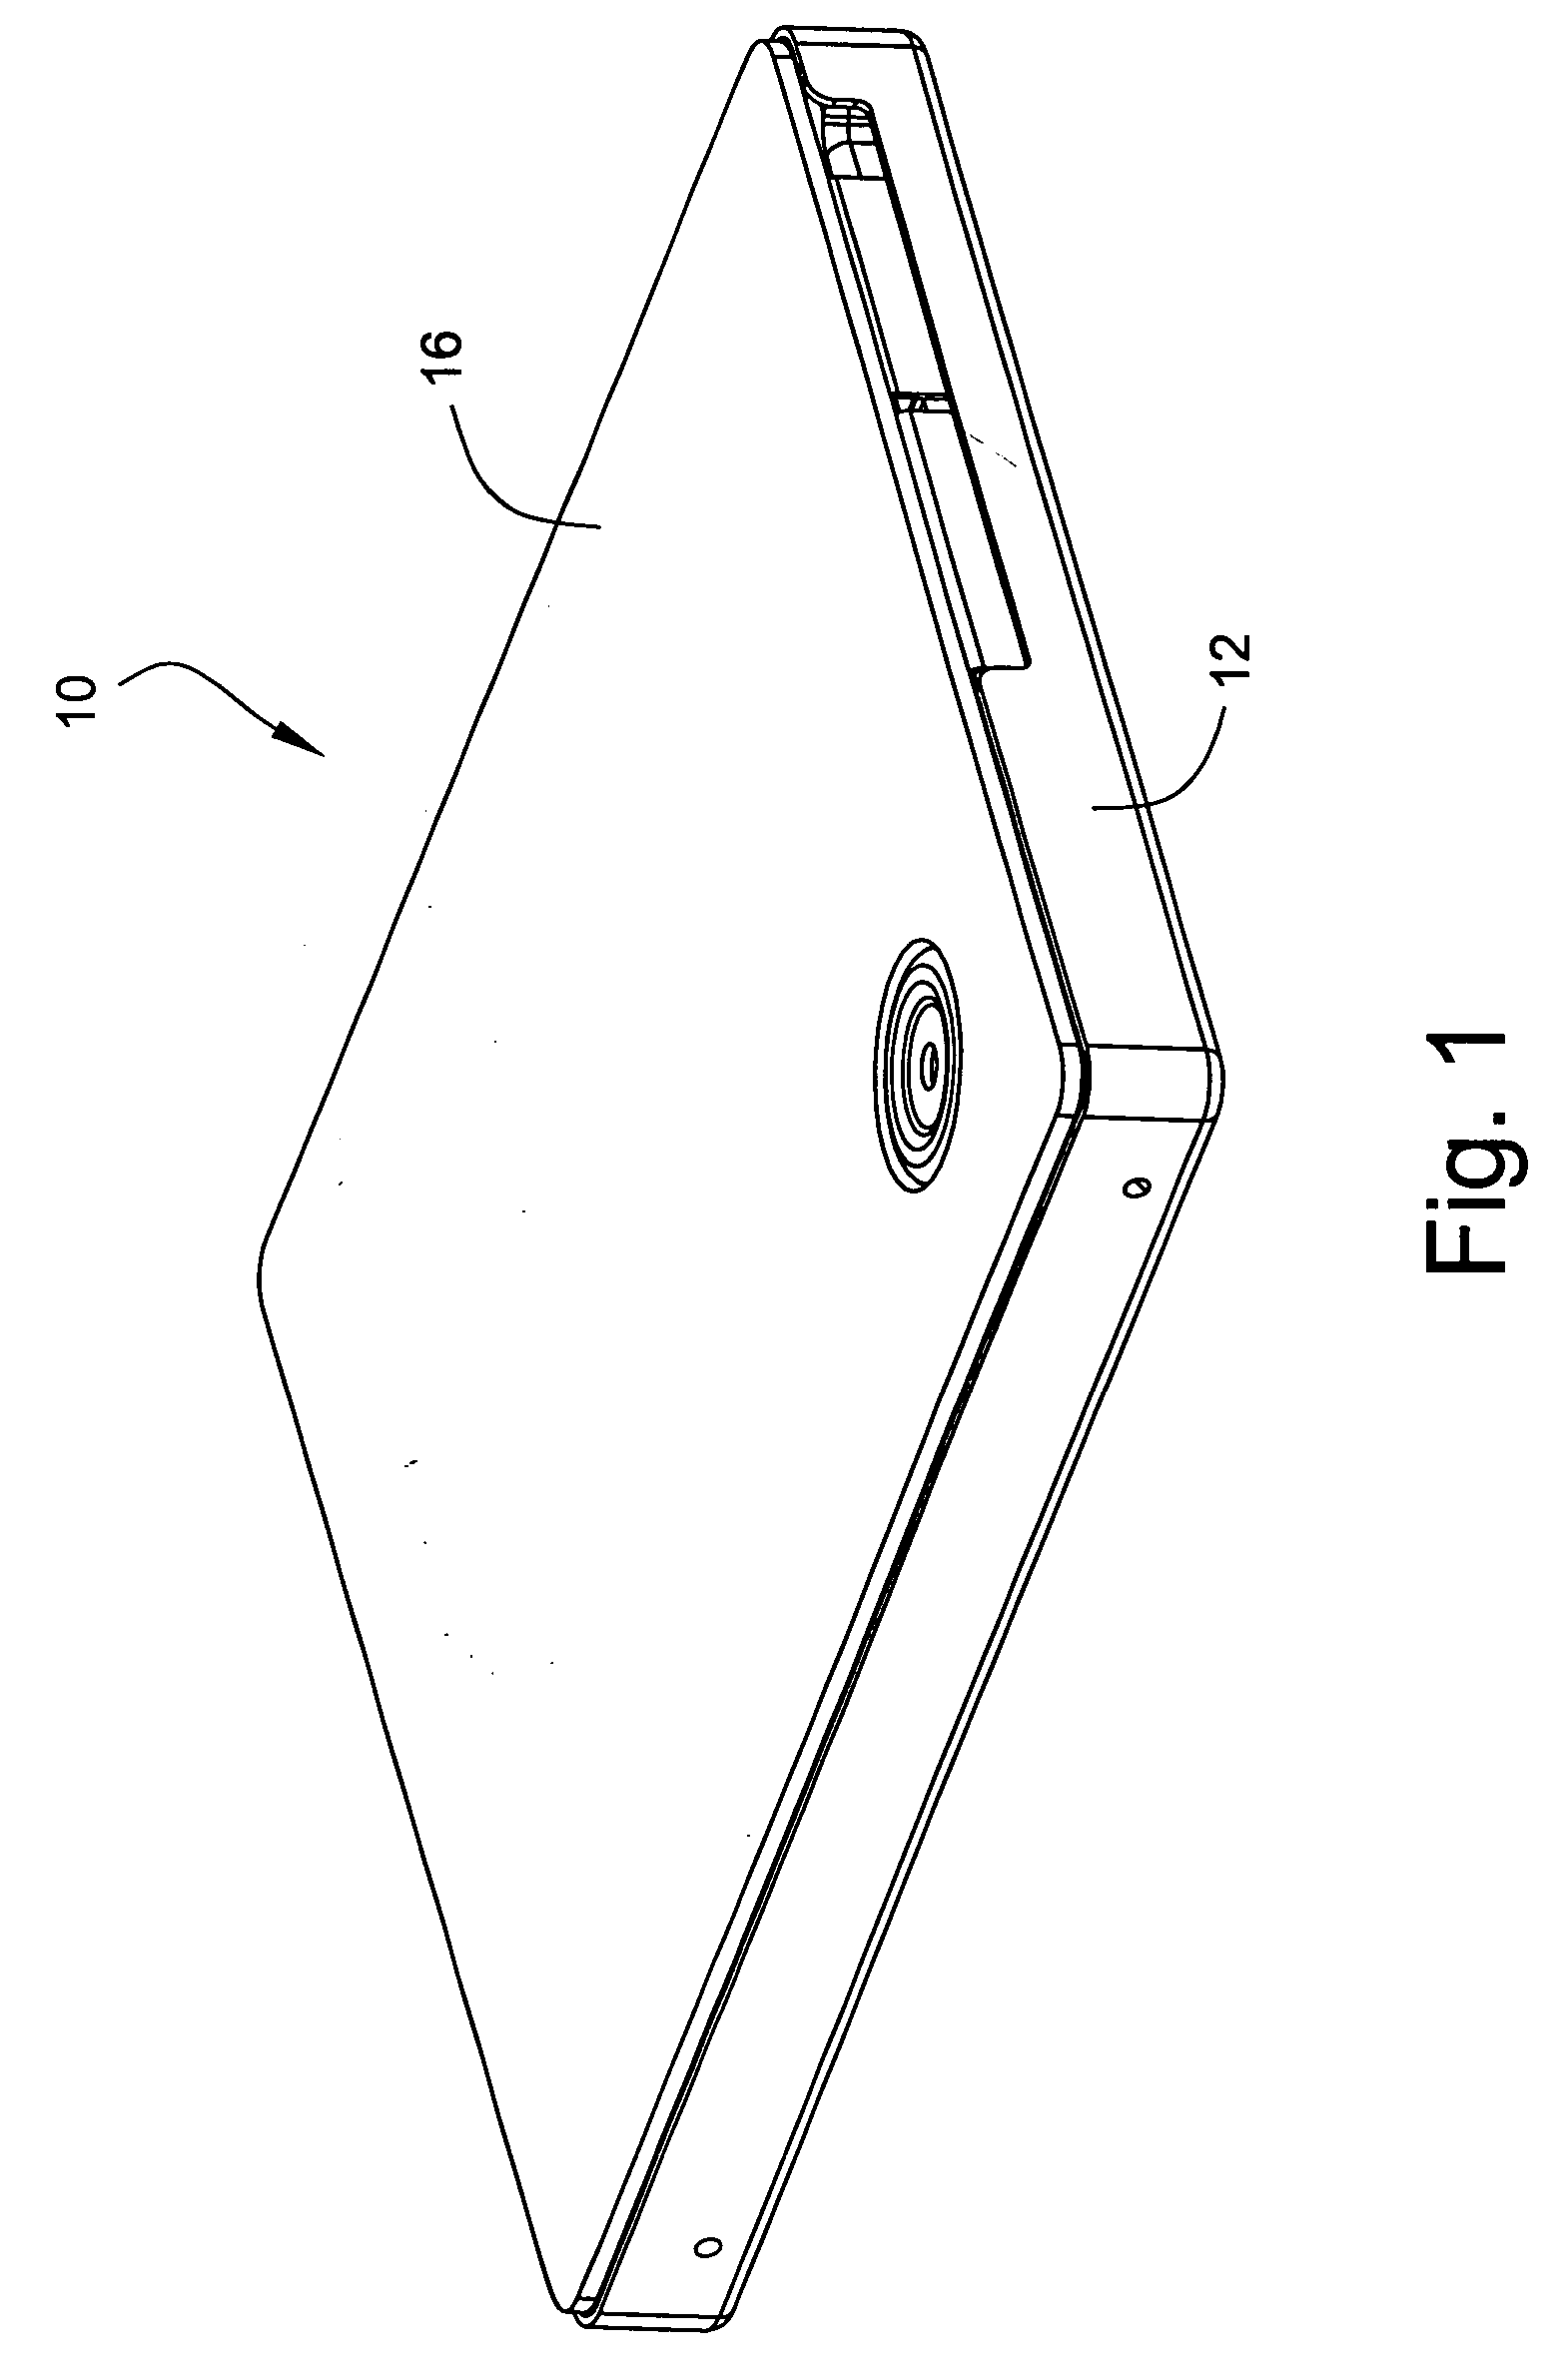 Soldering device and method for forming electrical solder connections in a disk drive unit